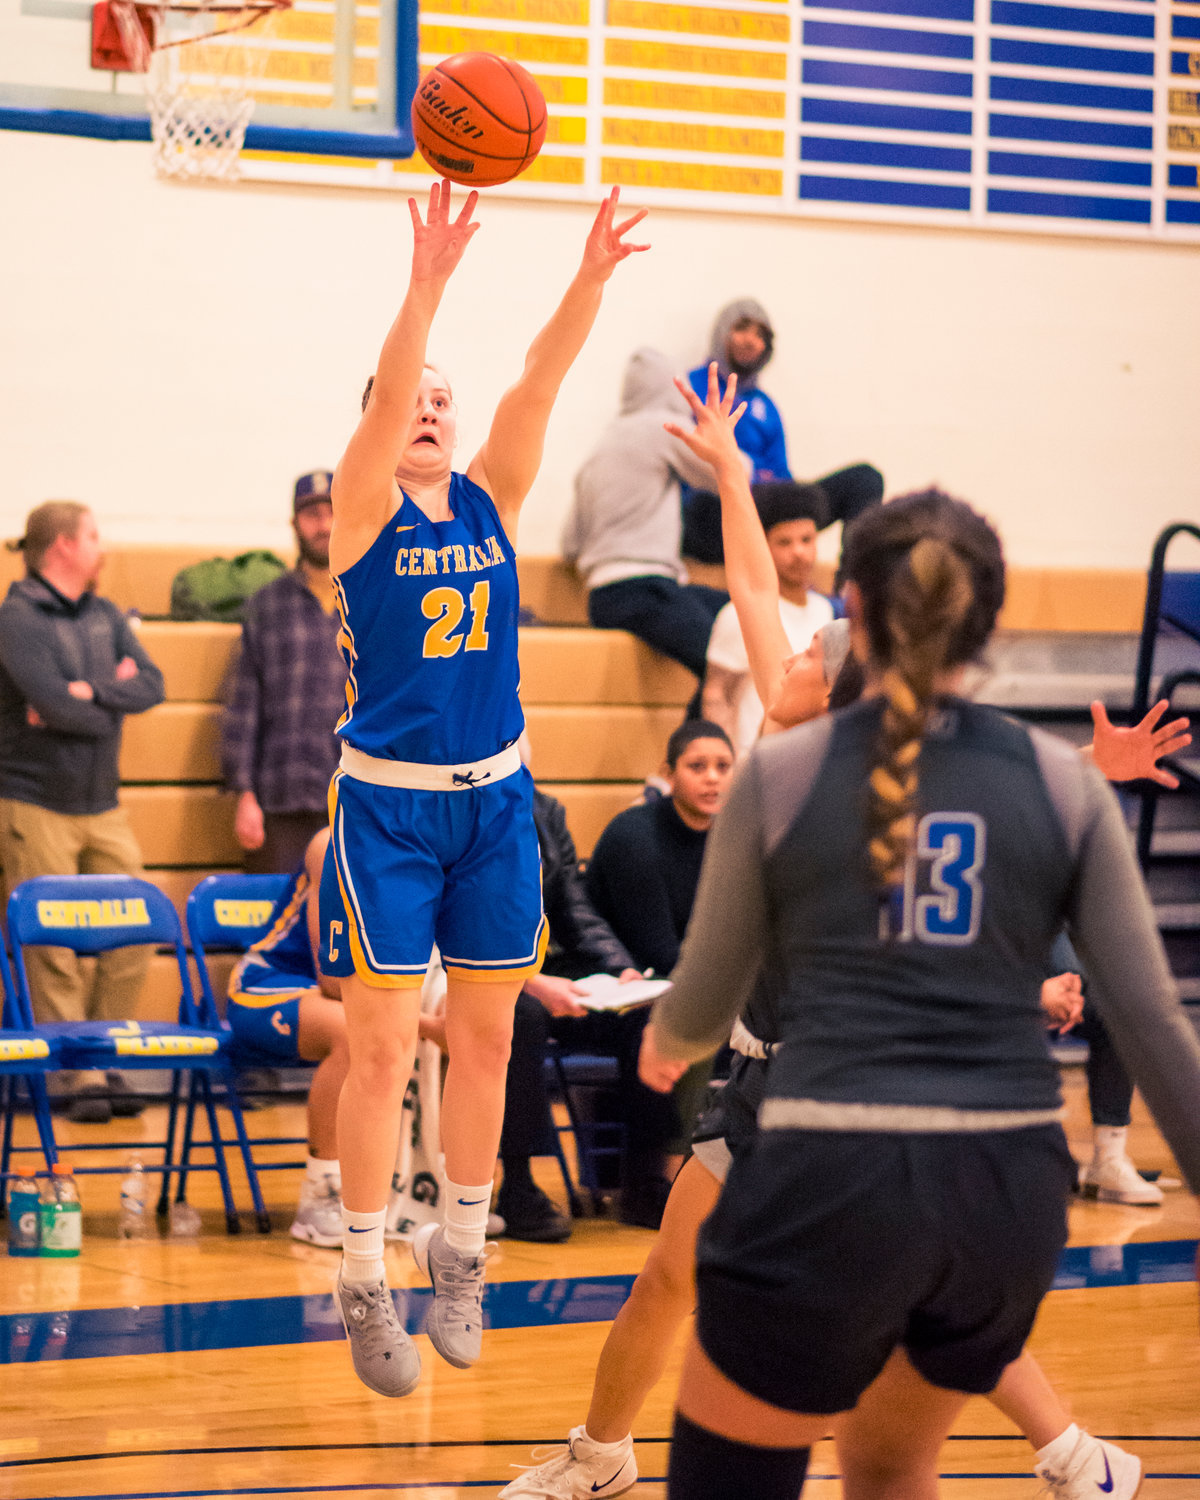 Centralia's Rachel Wilkerson (21) takes an outside shot during a women's basketball game against S.P.S.C.C Wednesday night at Centralia College.